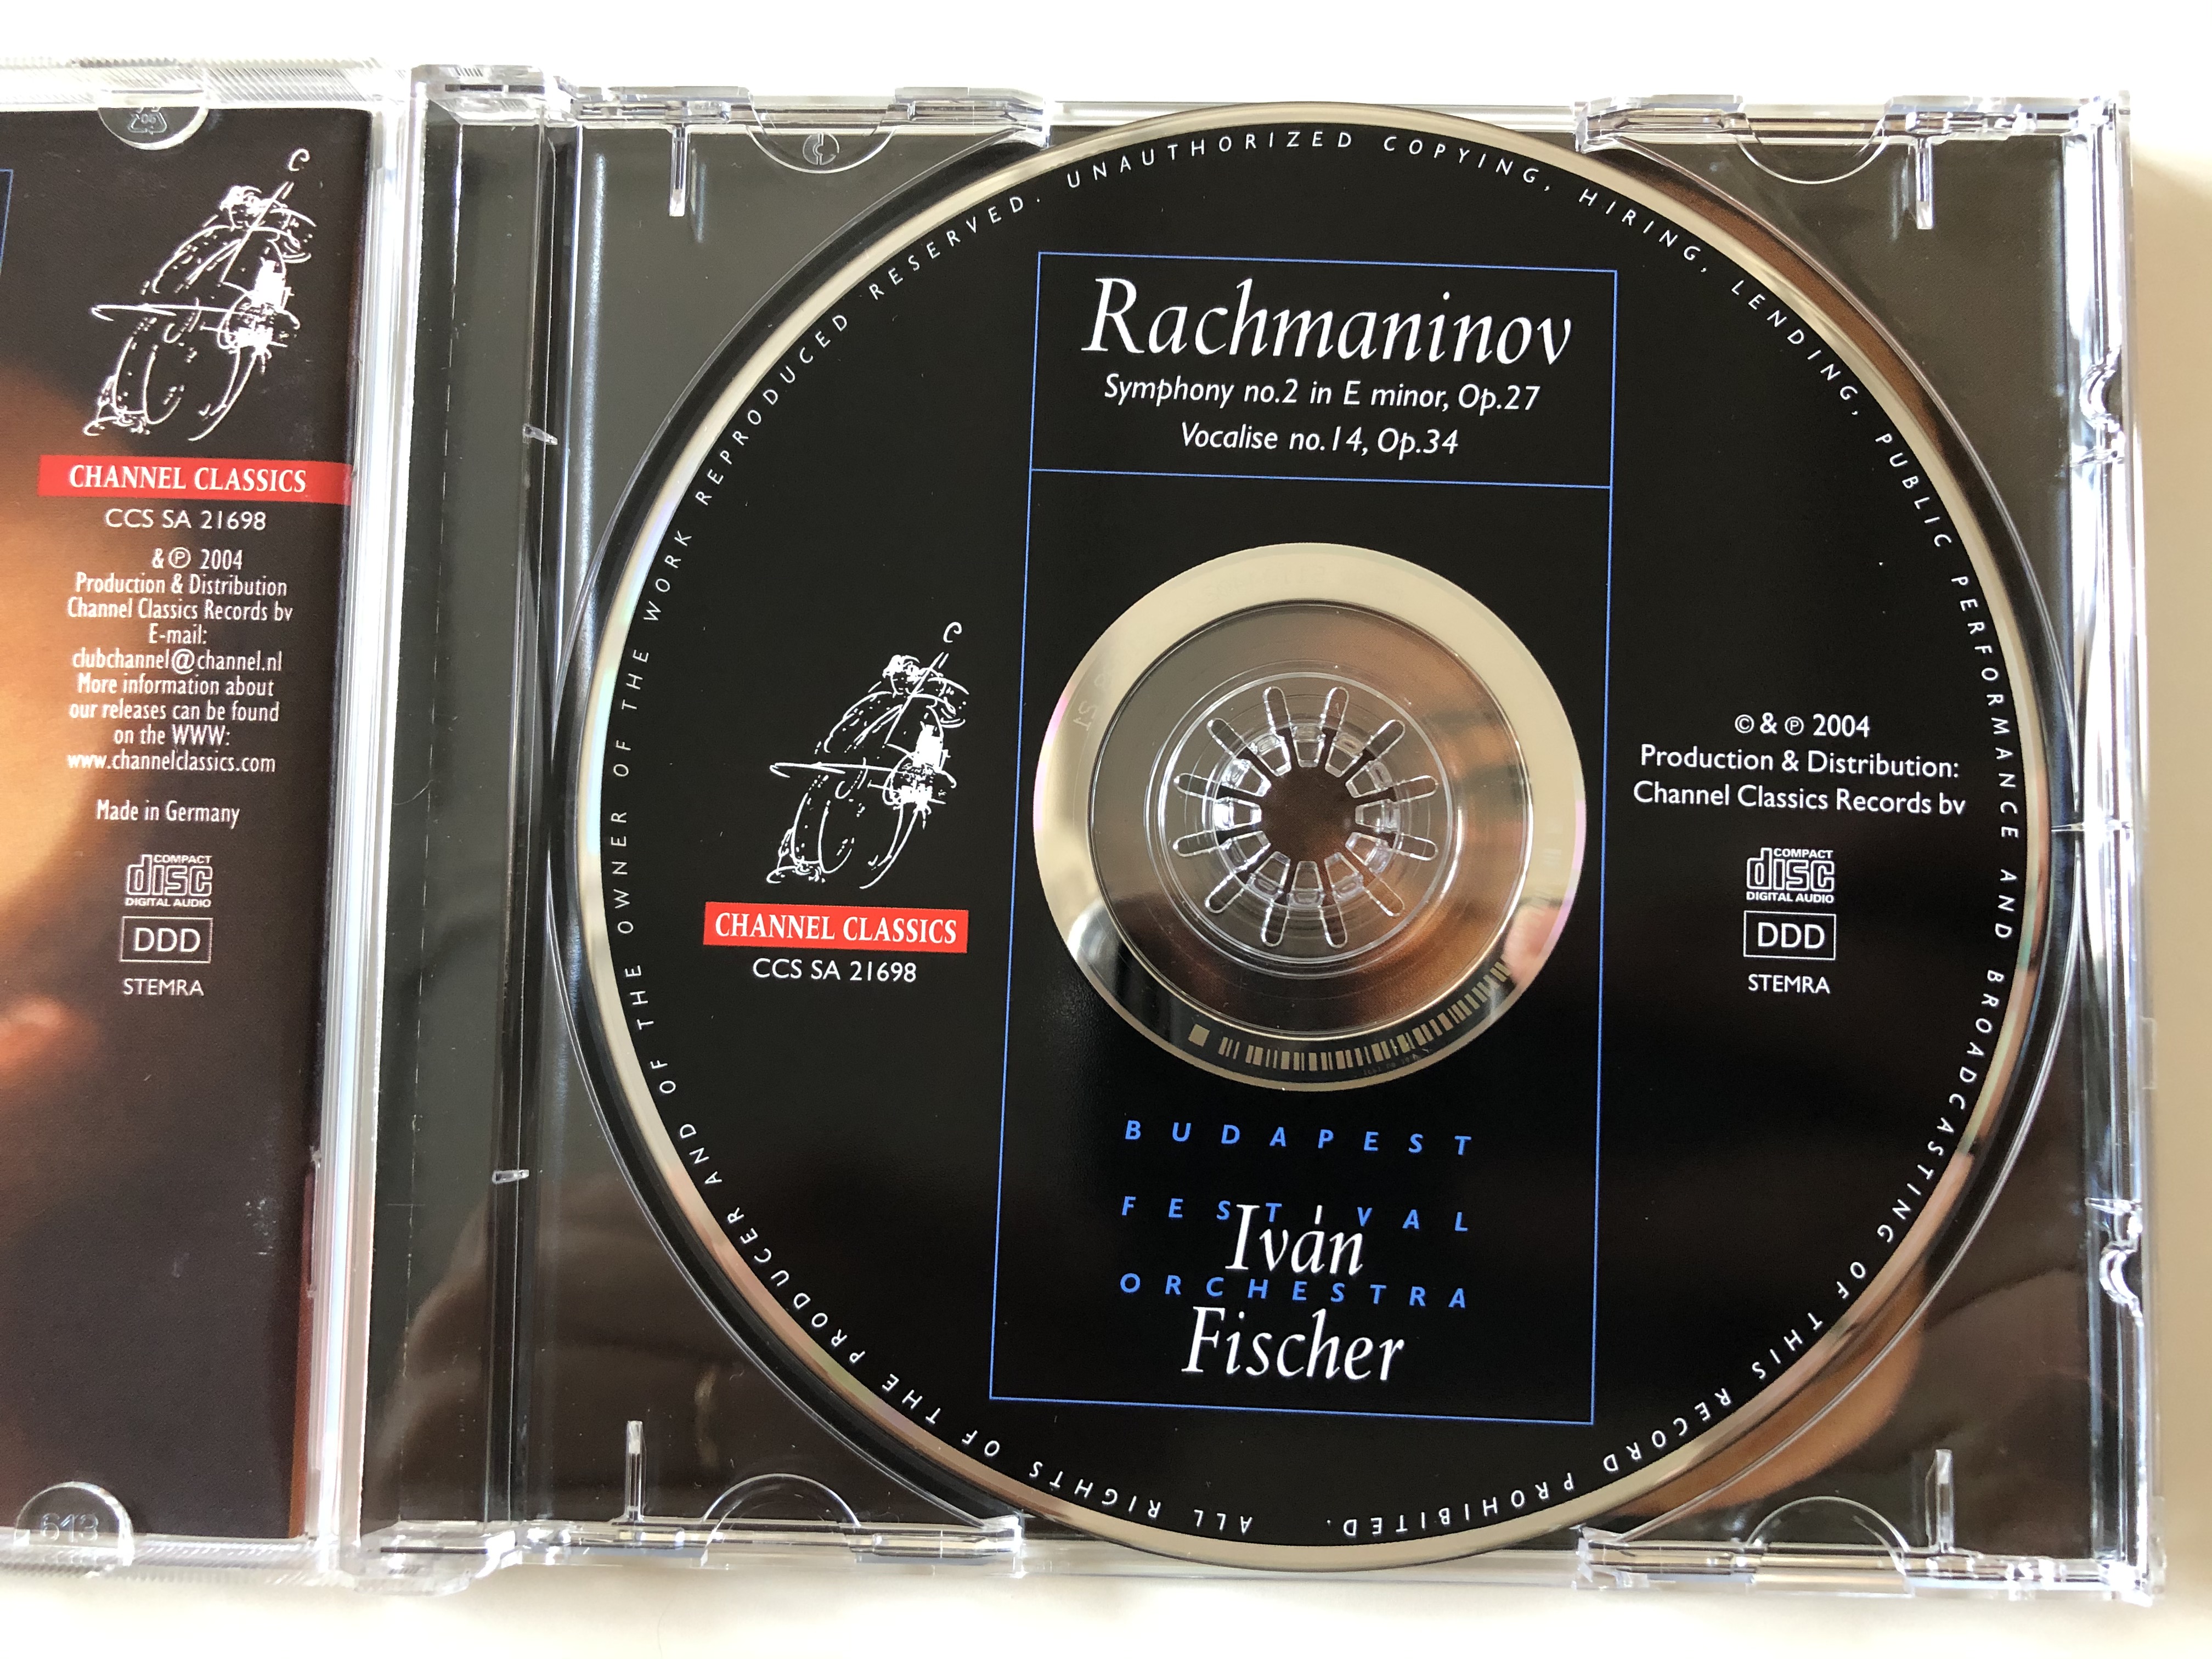 rachmaninov-symphony-no.-2-in-e-minor-op.-27-vocalise-no.-14-op.-34-iv-n-fischer-budapest-festival-orchestra-channel-classics-audio-cd-2004-ccs-sa-21698-9-.jpg